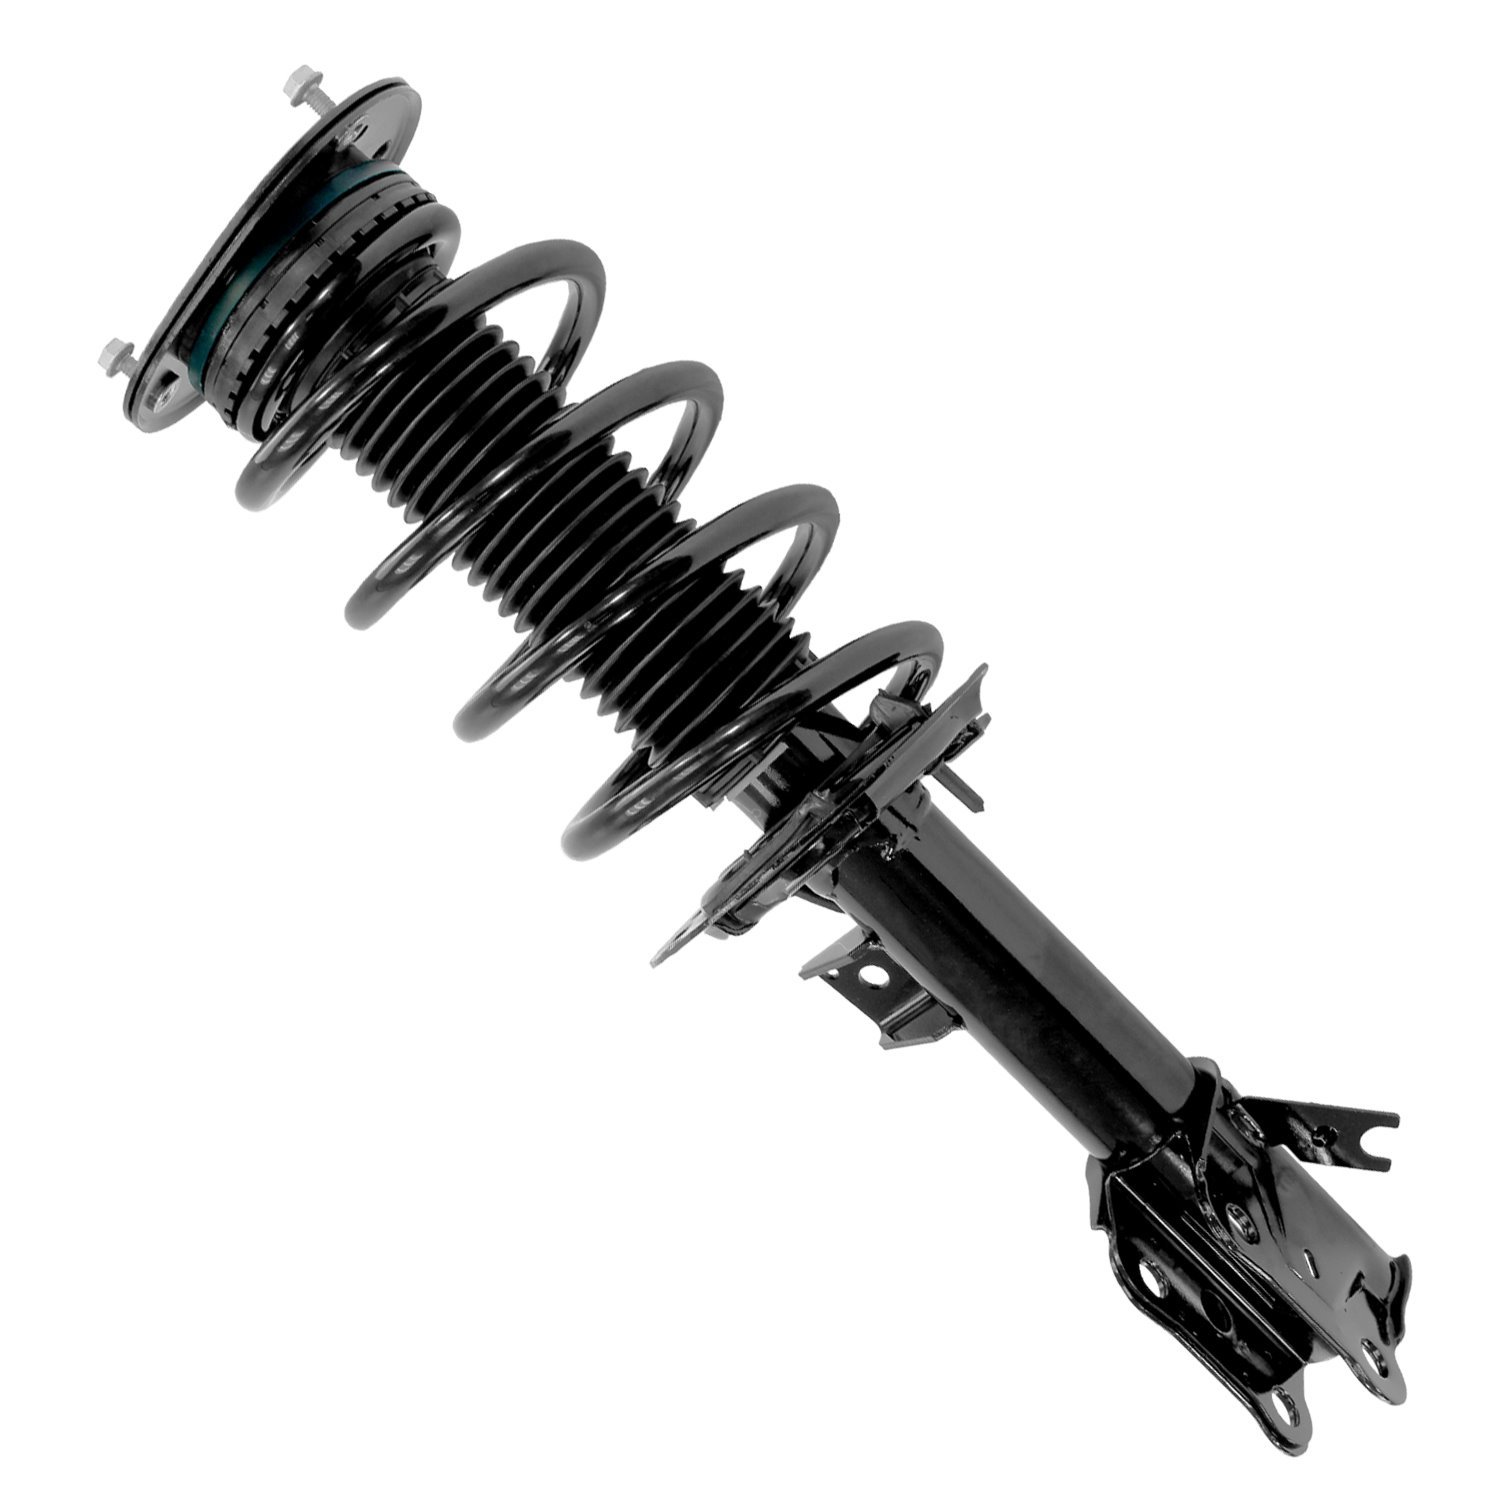 13522 Front Suspension Strut & Coil Spring Assemby Fits Select Ford Edge, Lincoln Nautilus, Lincoln MKX